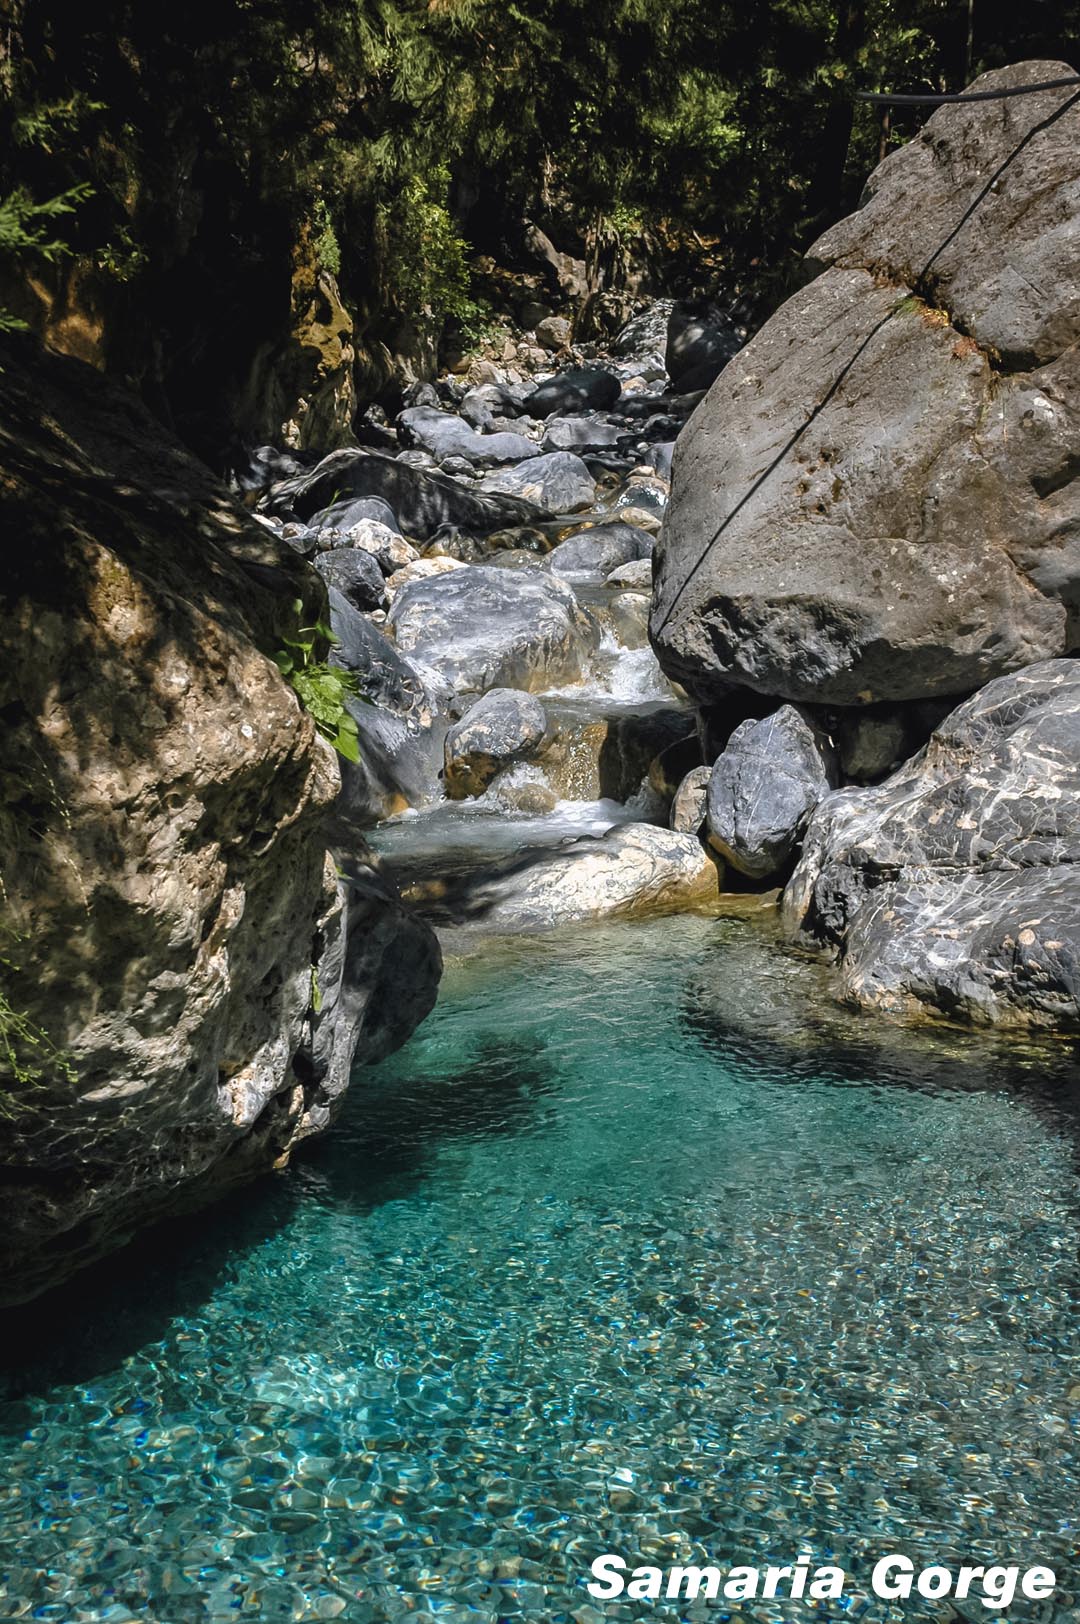 Waters of the Samaria Gorge